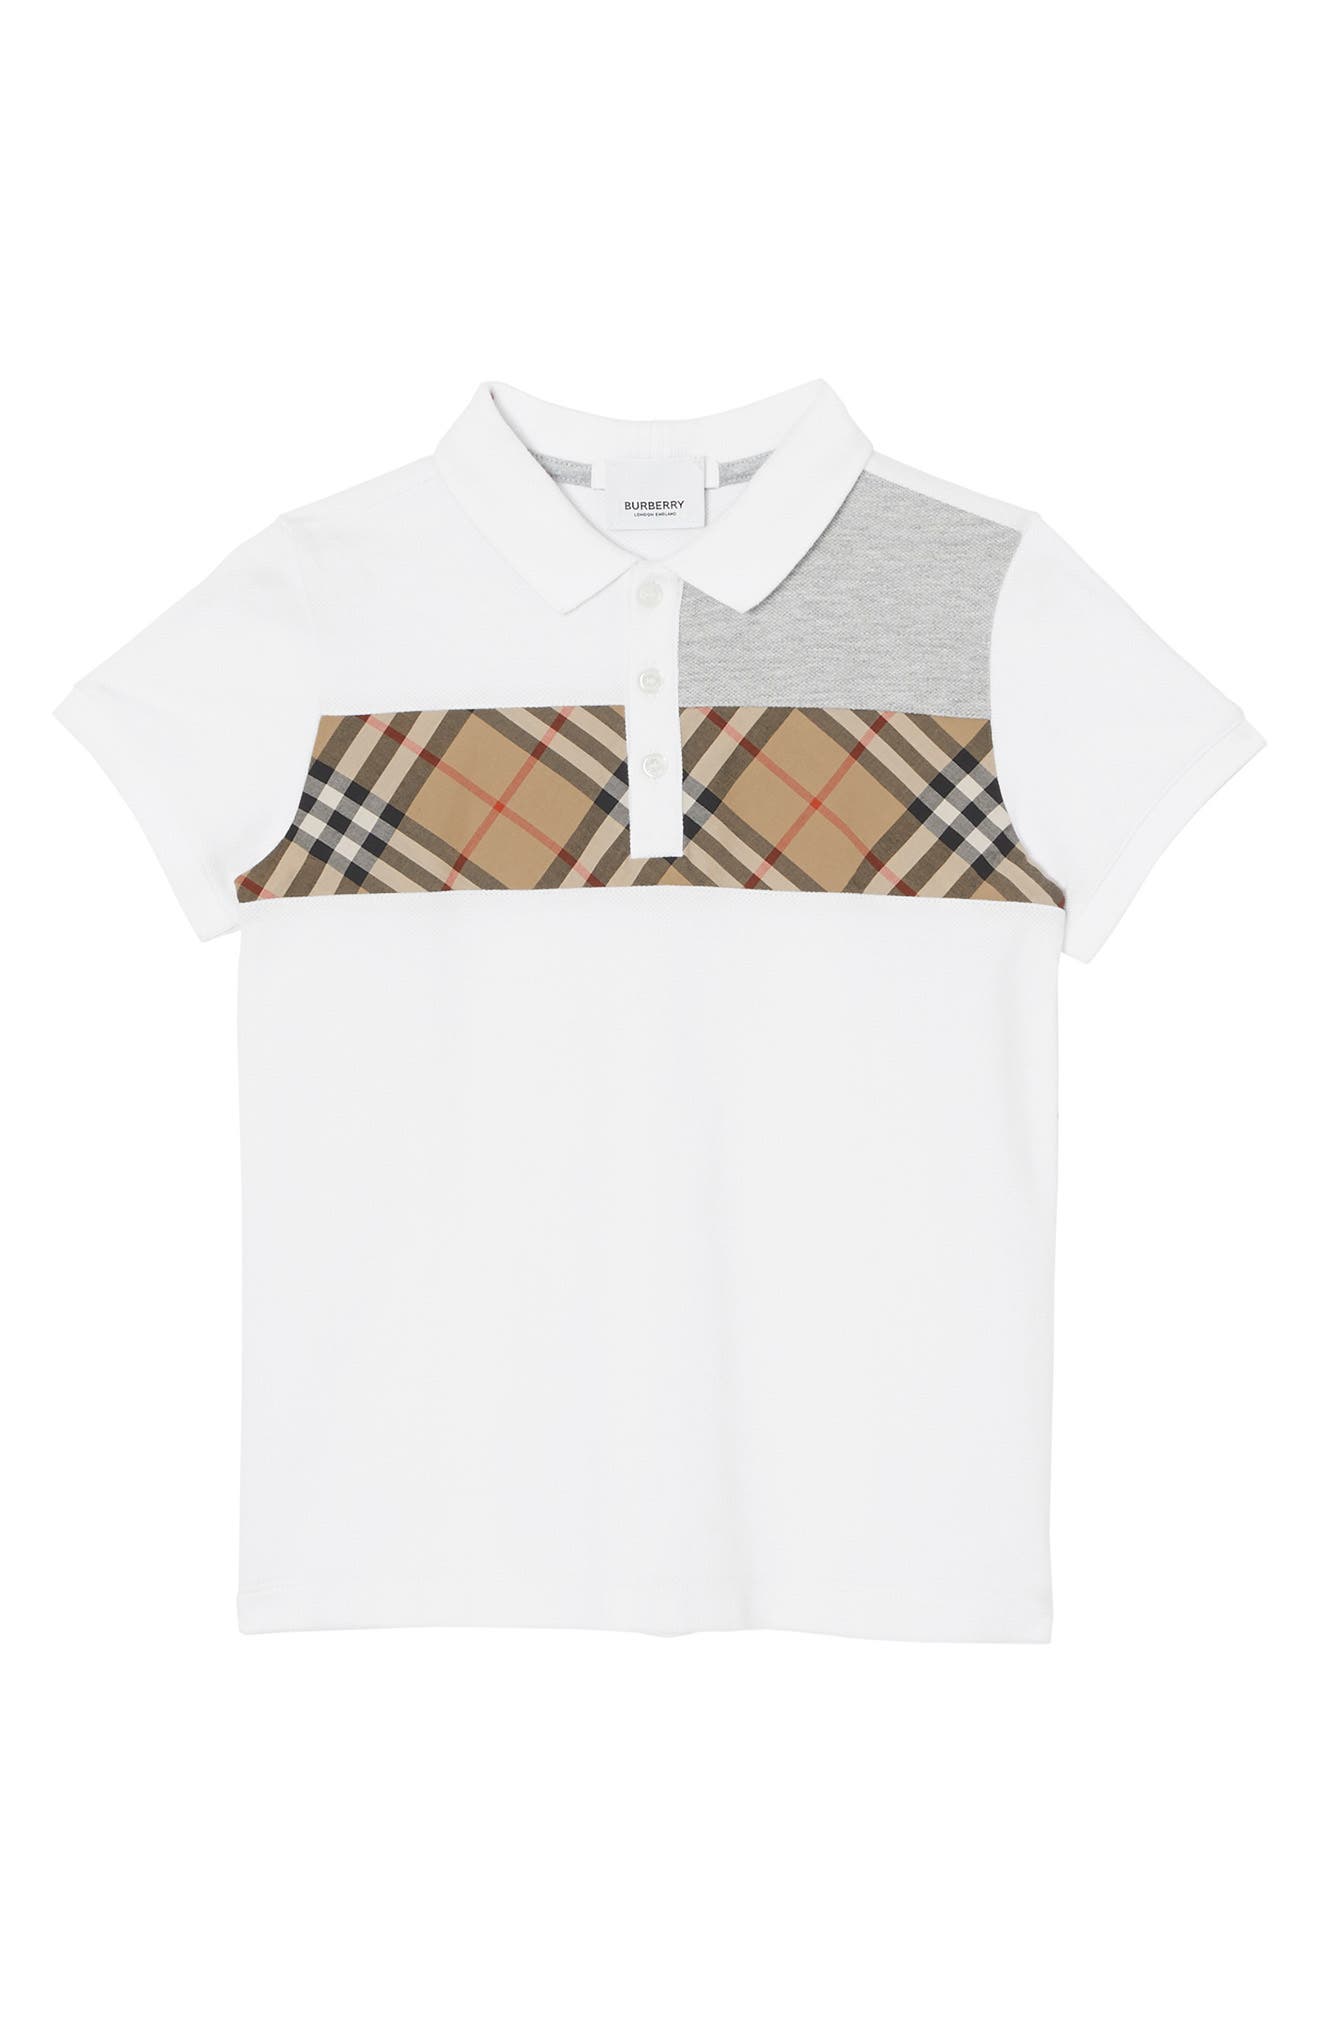 youth burberry shirt